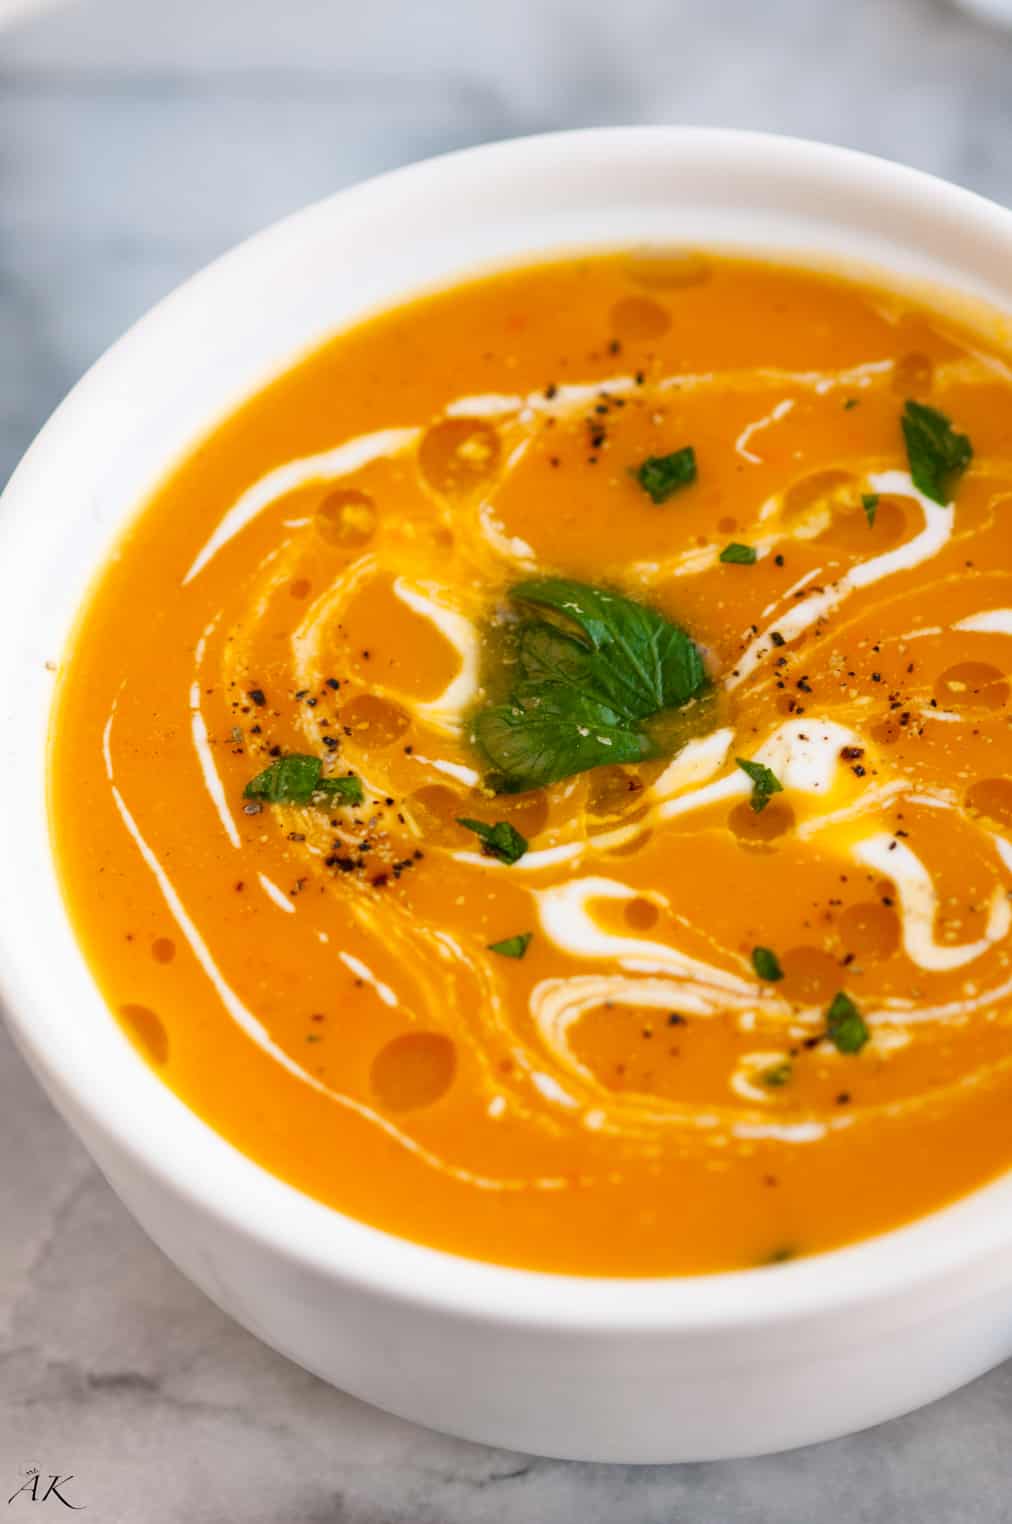 Soup Recipes Using Butternut Squash - Photos All Recommendation